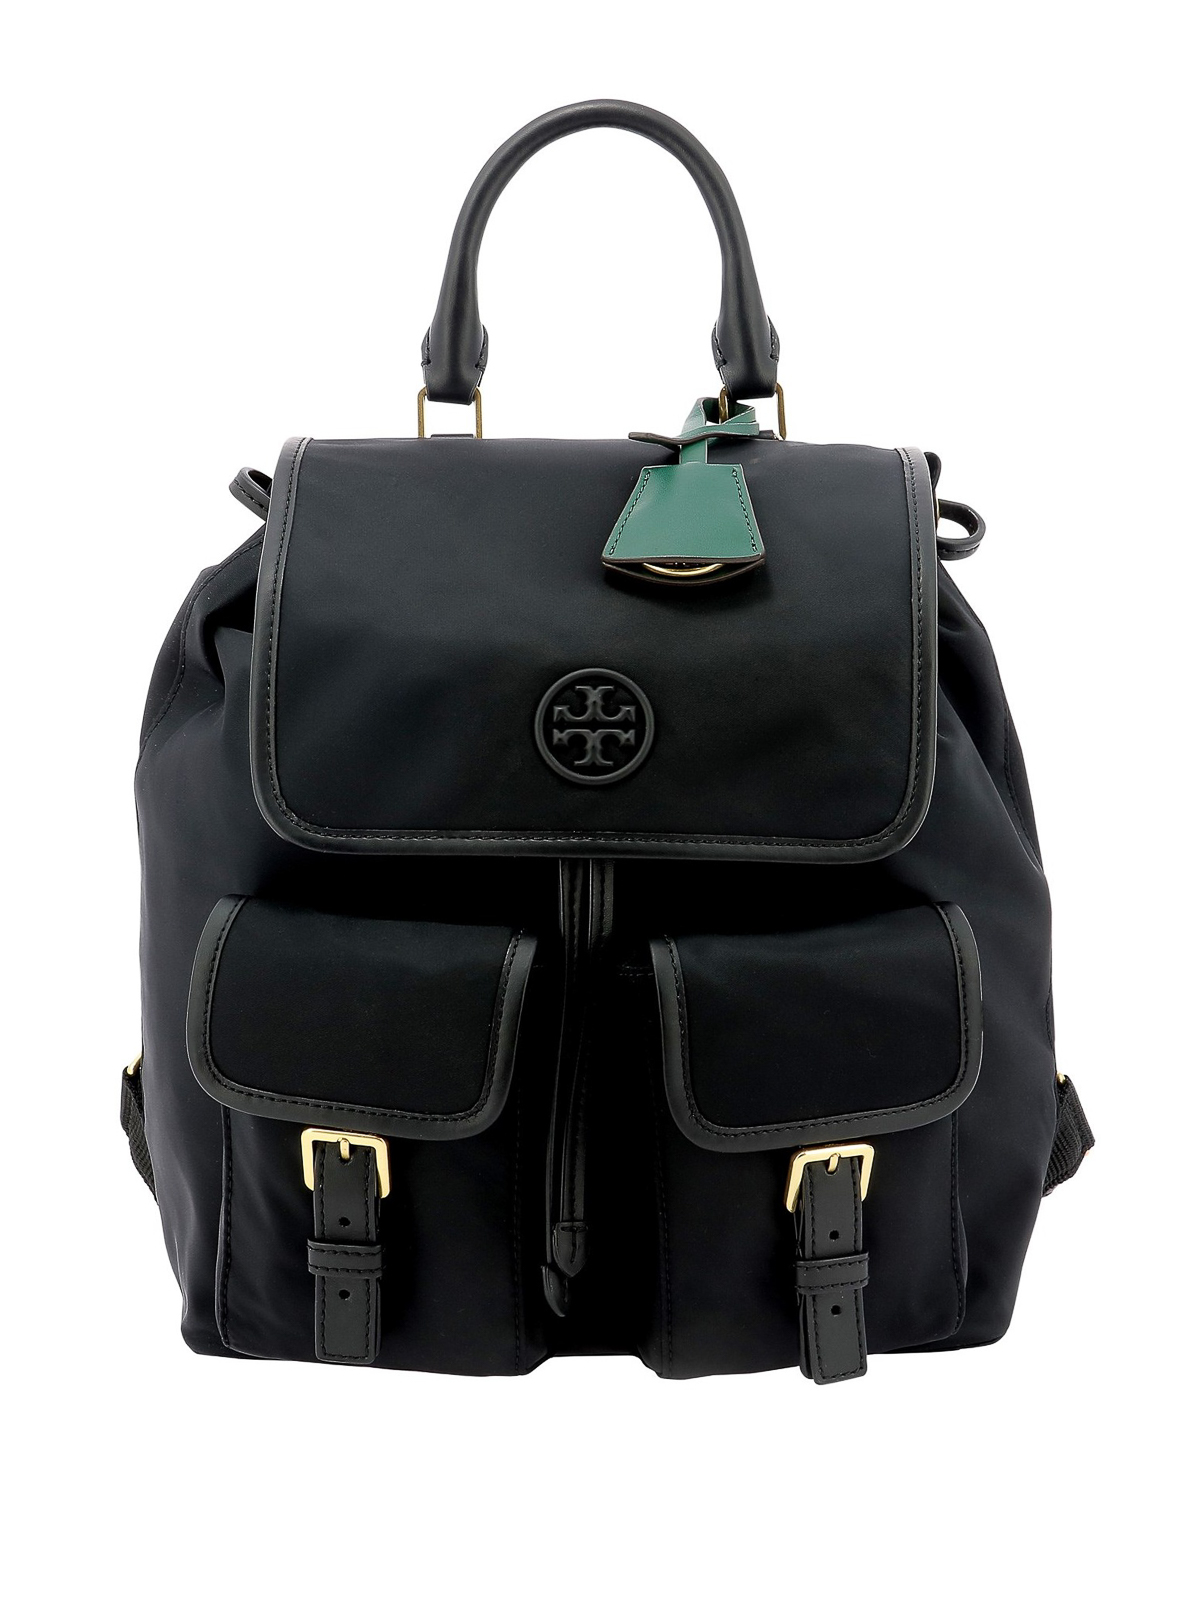 Backpacks Tory Burch - Perry backpack - 74462001 | Shop online at iKRIX